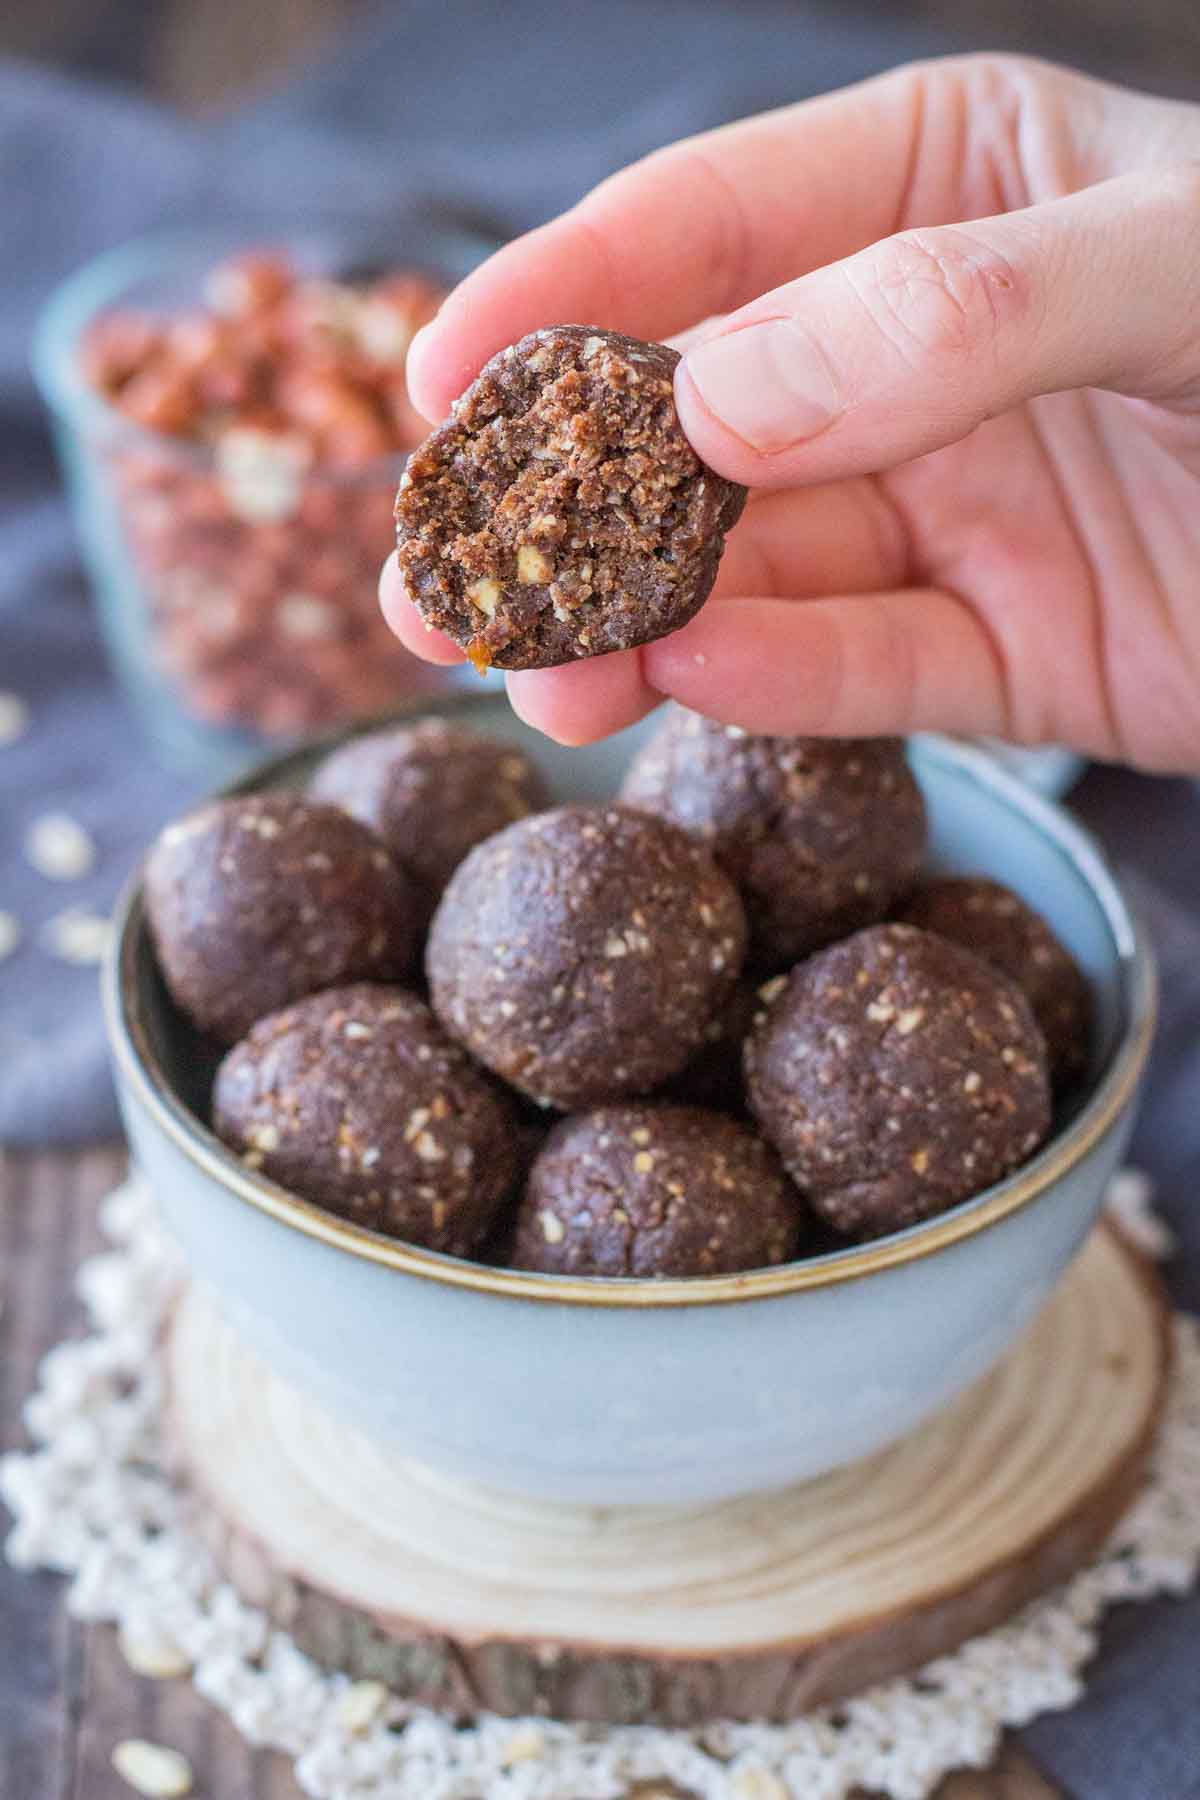 Hand taking Chocolate Peanut Butter Balls from a bowl